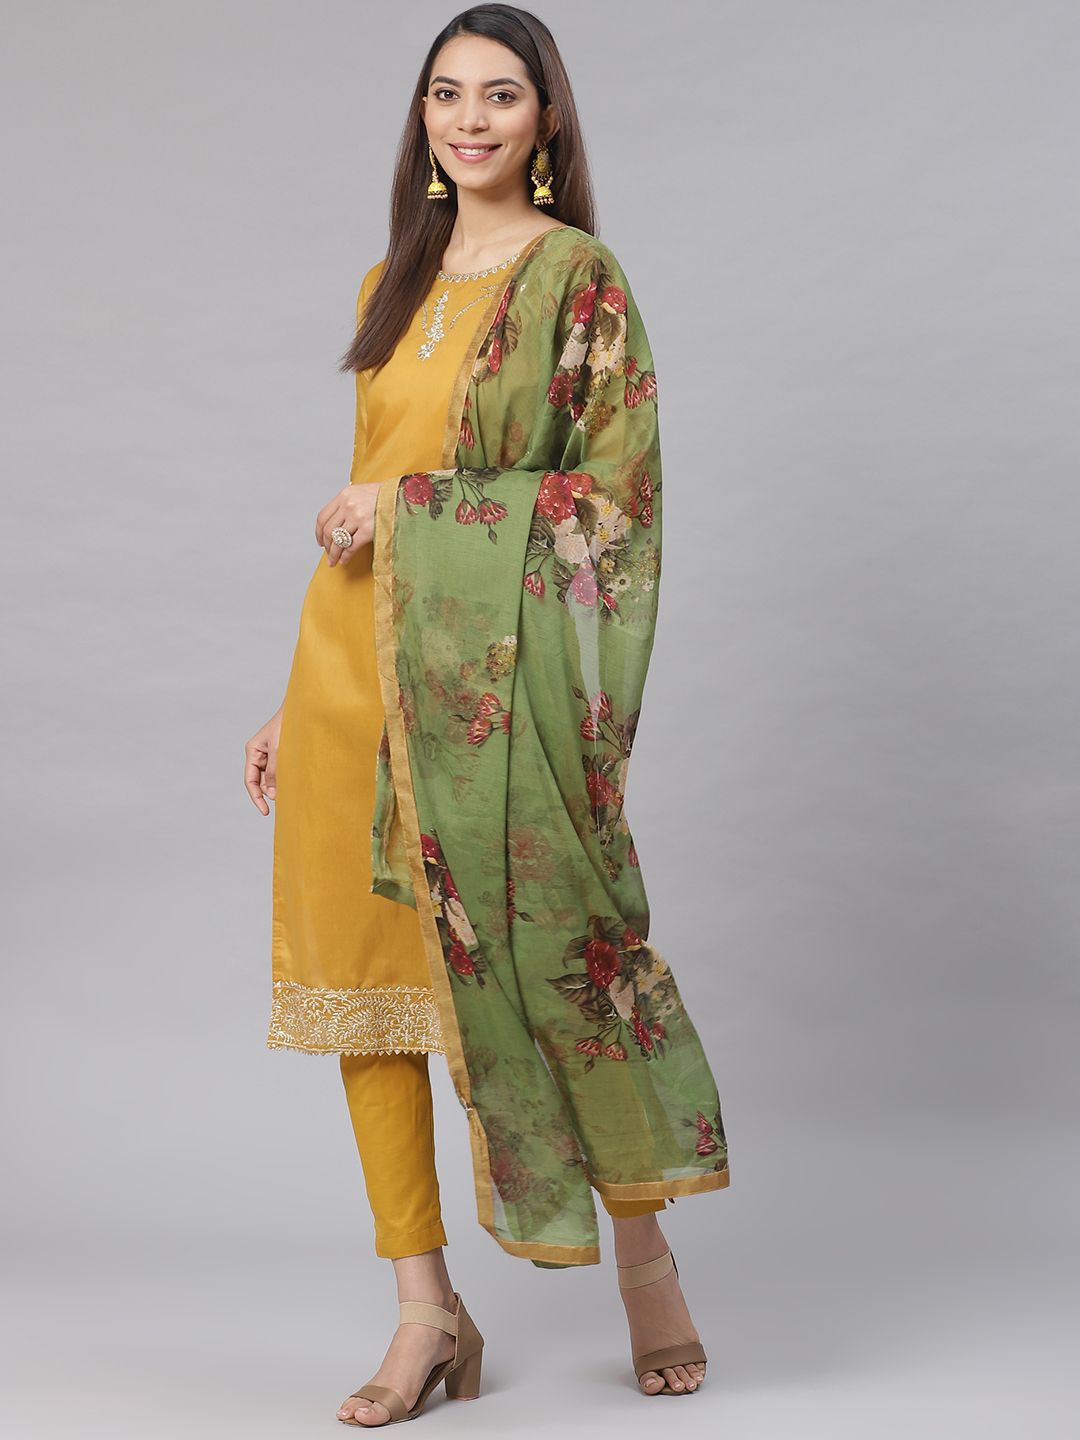 Saree mall Mustard Yellow Solid Semi-Stitched Dress Material Price in India